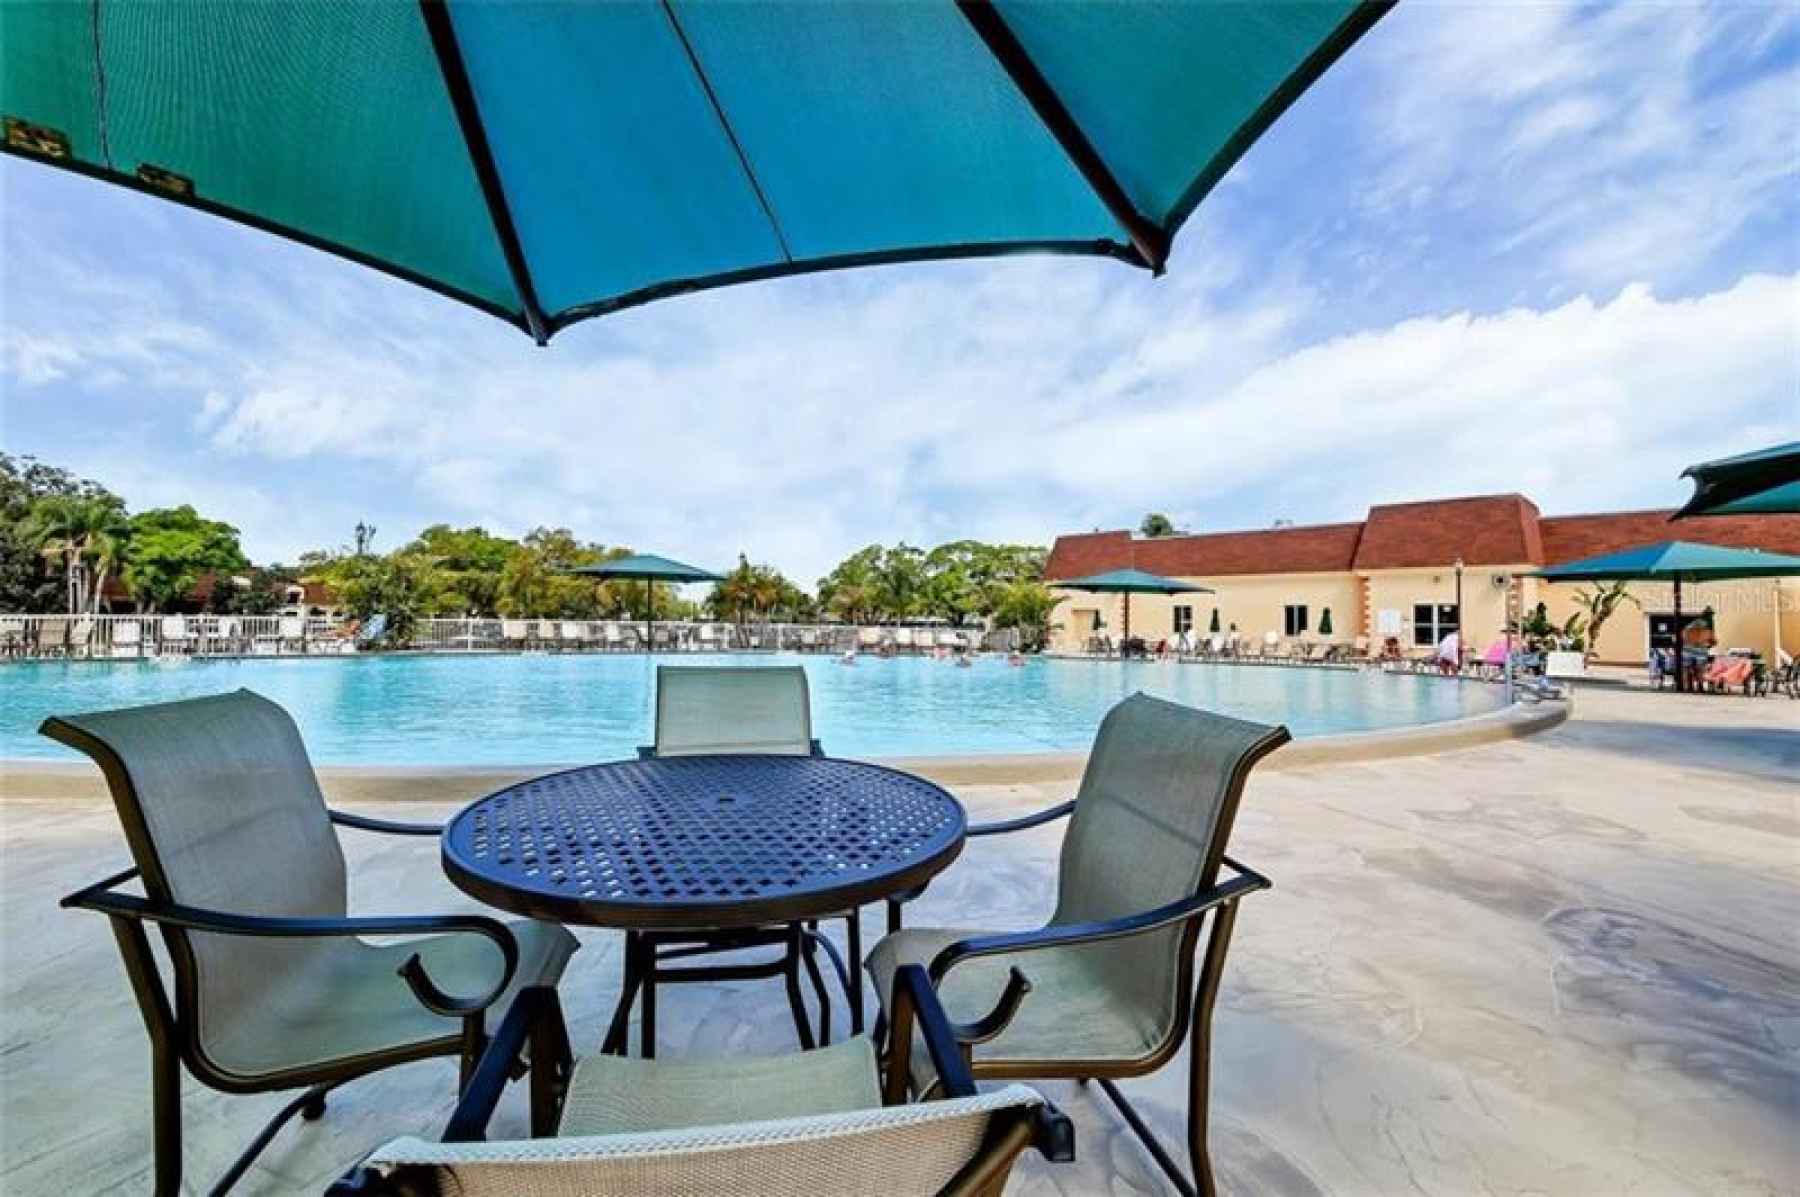 Main clubhouse outdoor pool